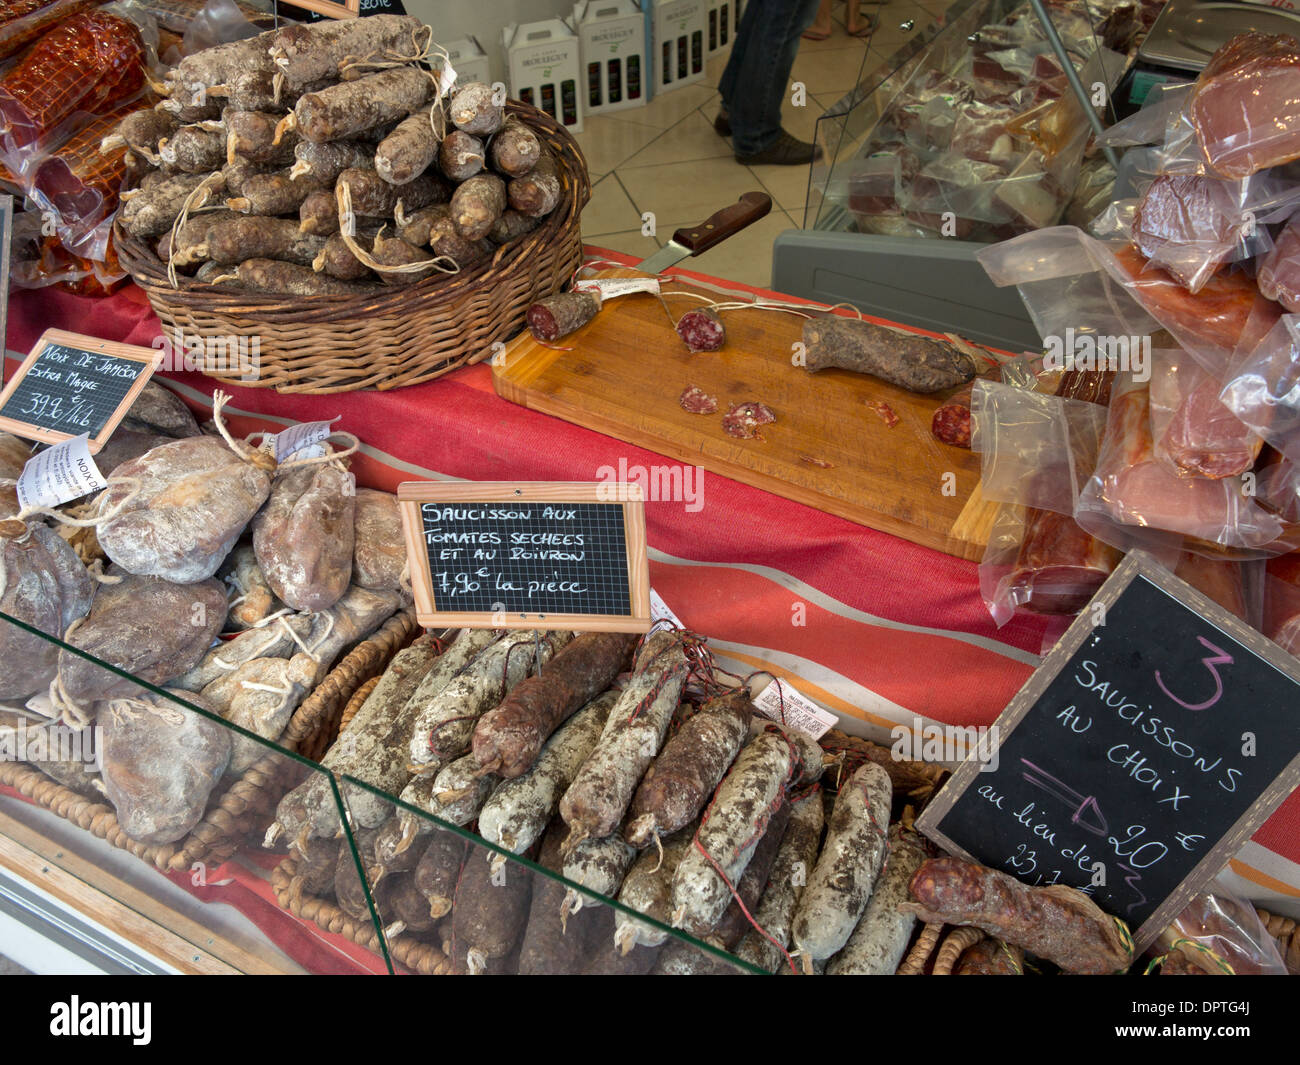 Saucisson High Resolution Stock Photography and Images - Alamy